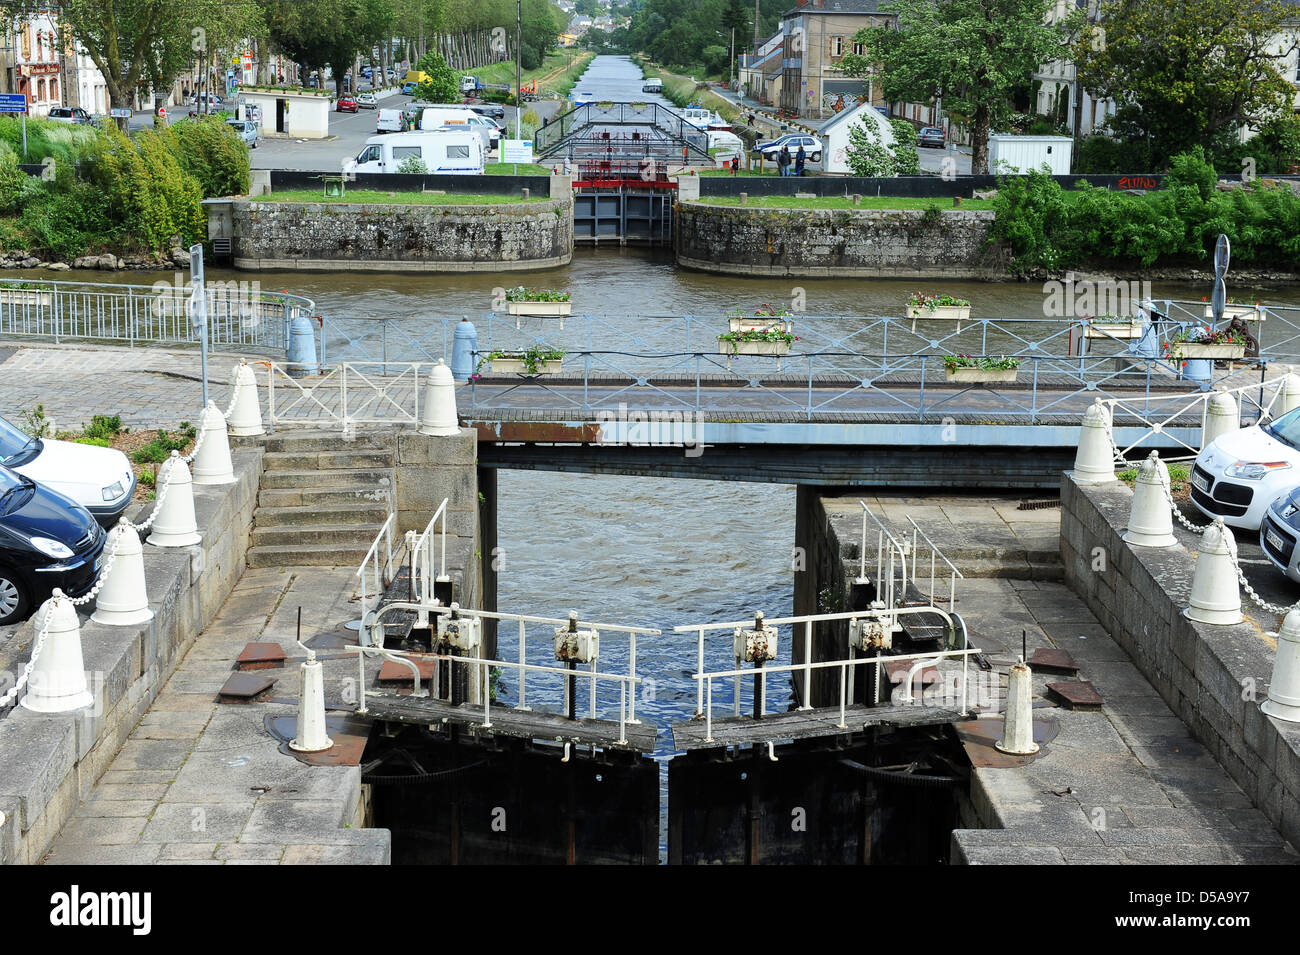 Locks connecting the Canal and Vilaine River in Redon in Brittany France Stock Photo